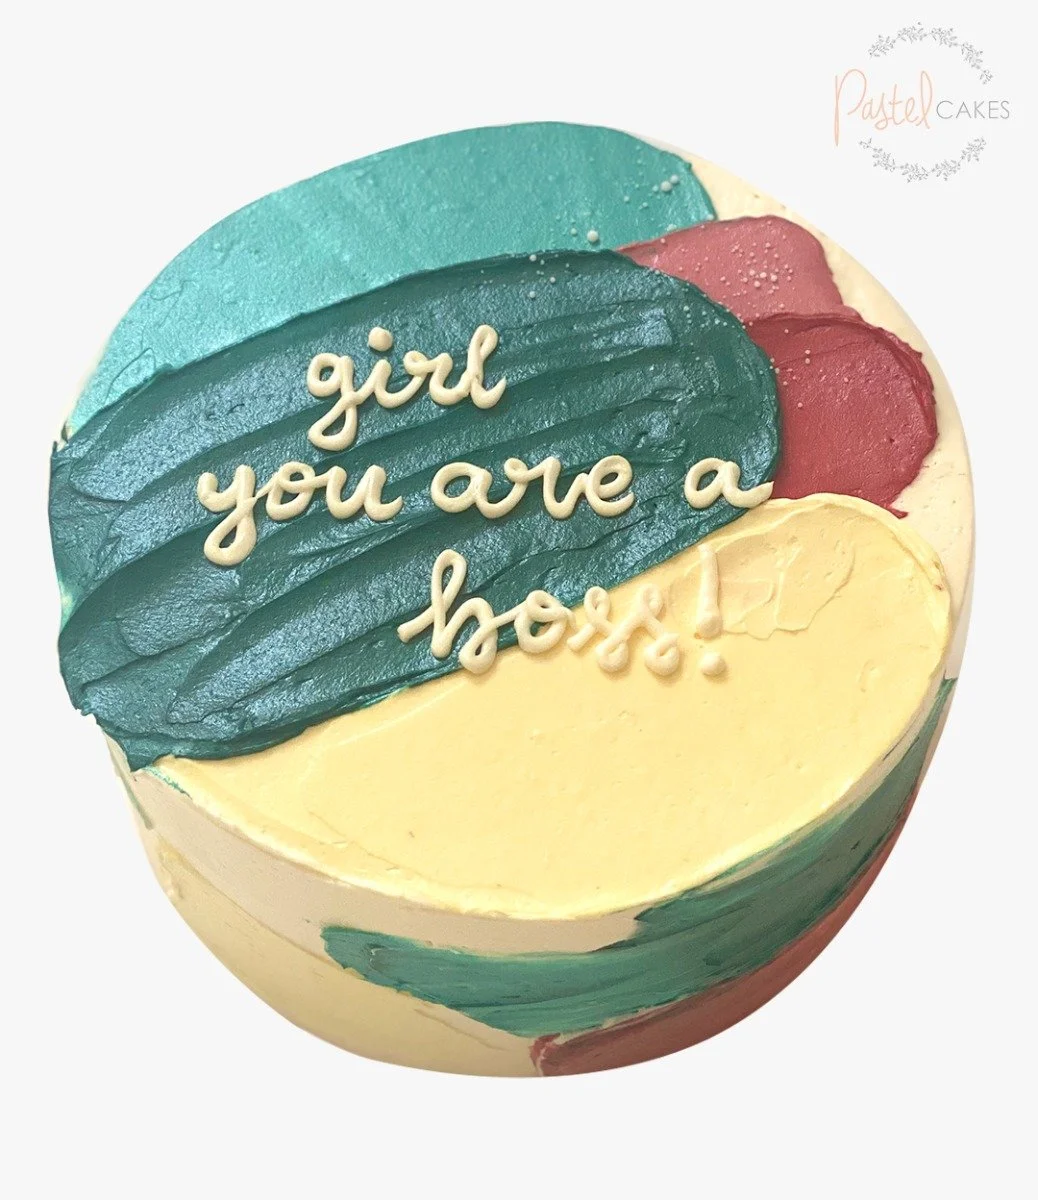 The One For The Boss by Pastel Cakes